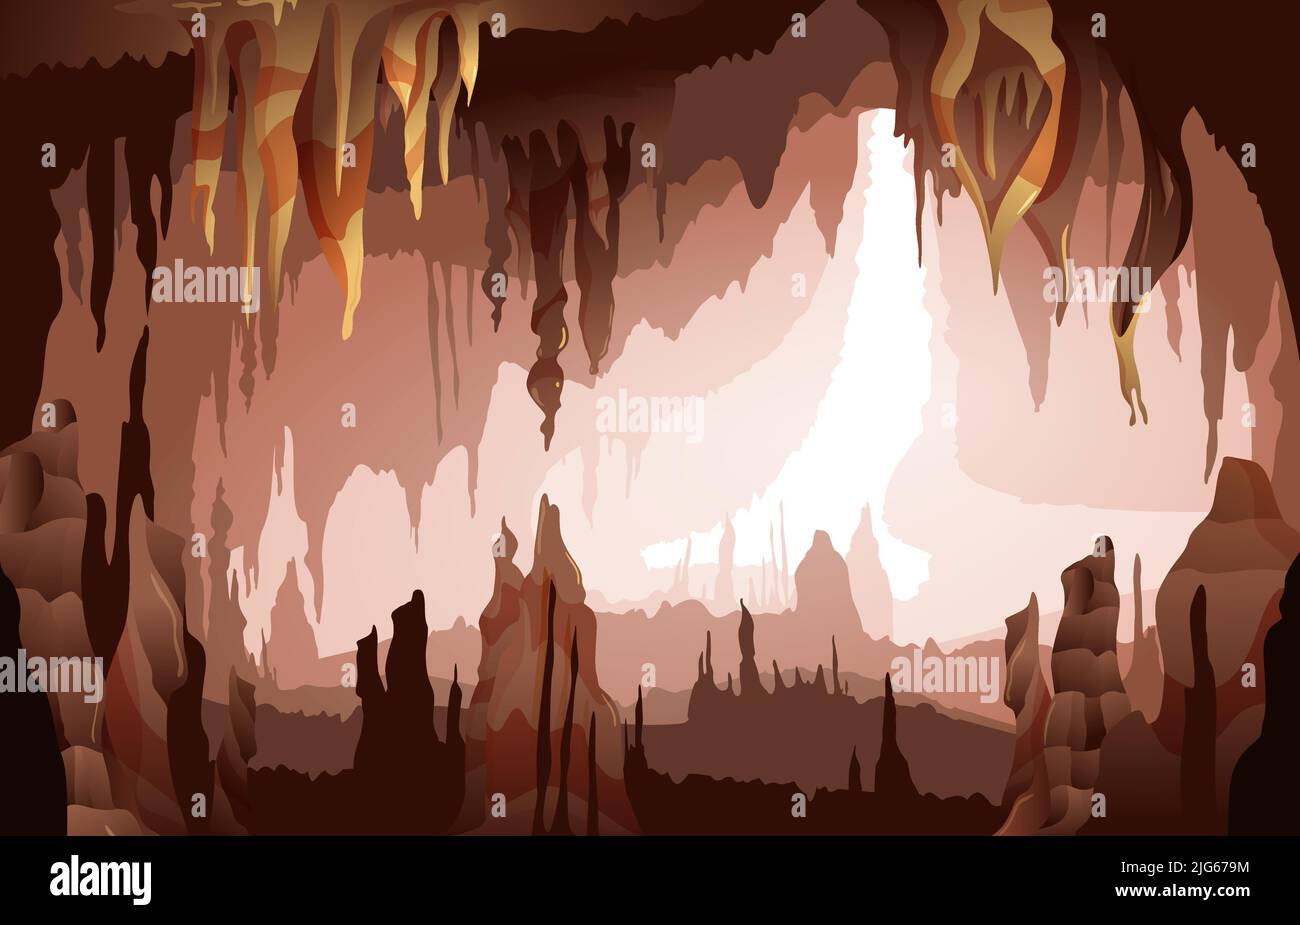 Limestone cave interior with hanging from ceiling stalactites and rising from floor stalagmites natural mineral formations vector illustration Stock Vector